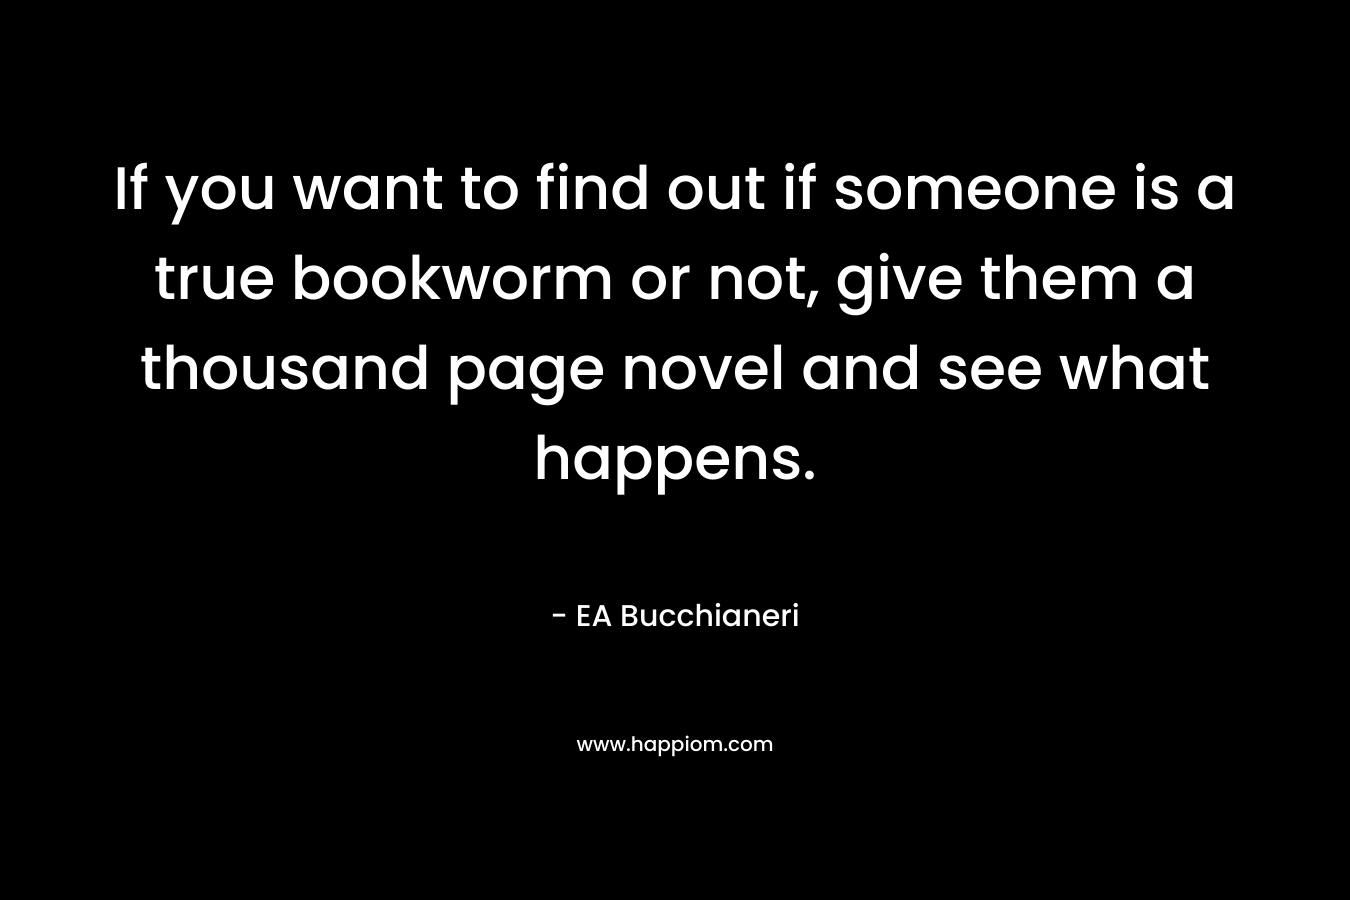 If you want to find out if someone is a true bookworm or not, give them a thousand page novel and see what happens. – EA Bucchianeri